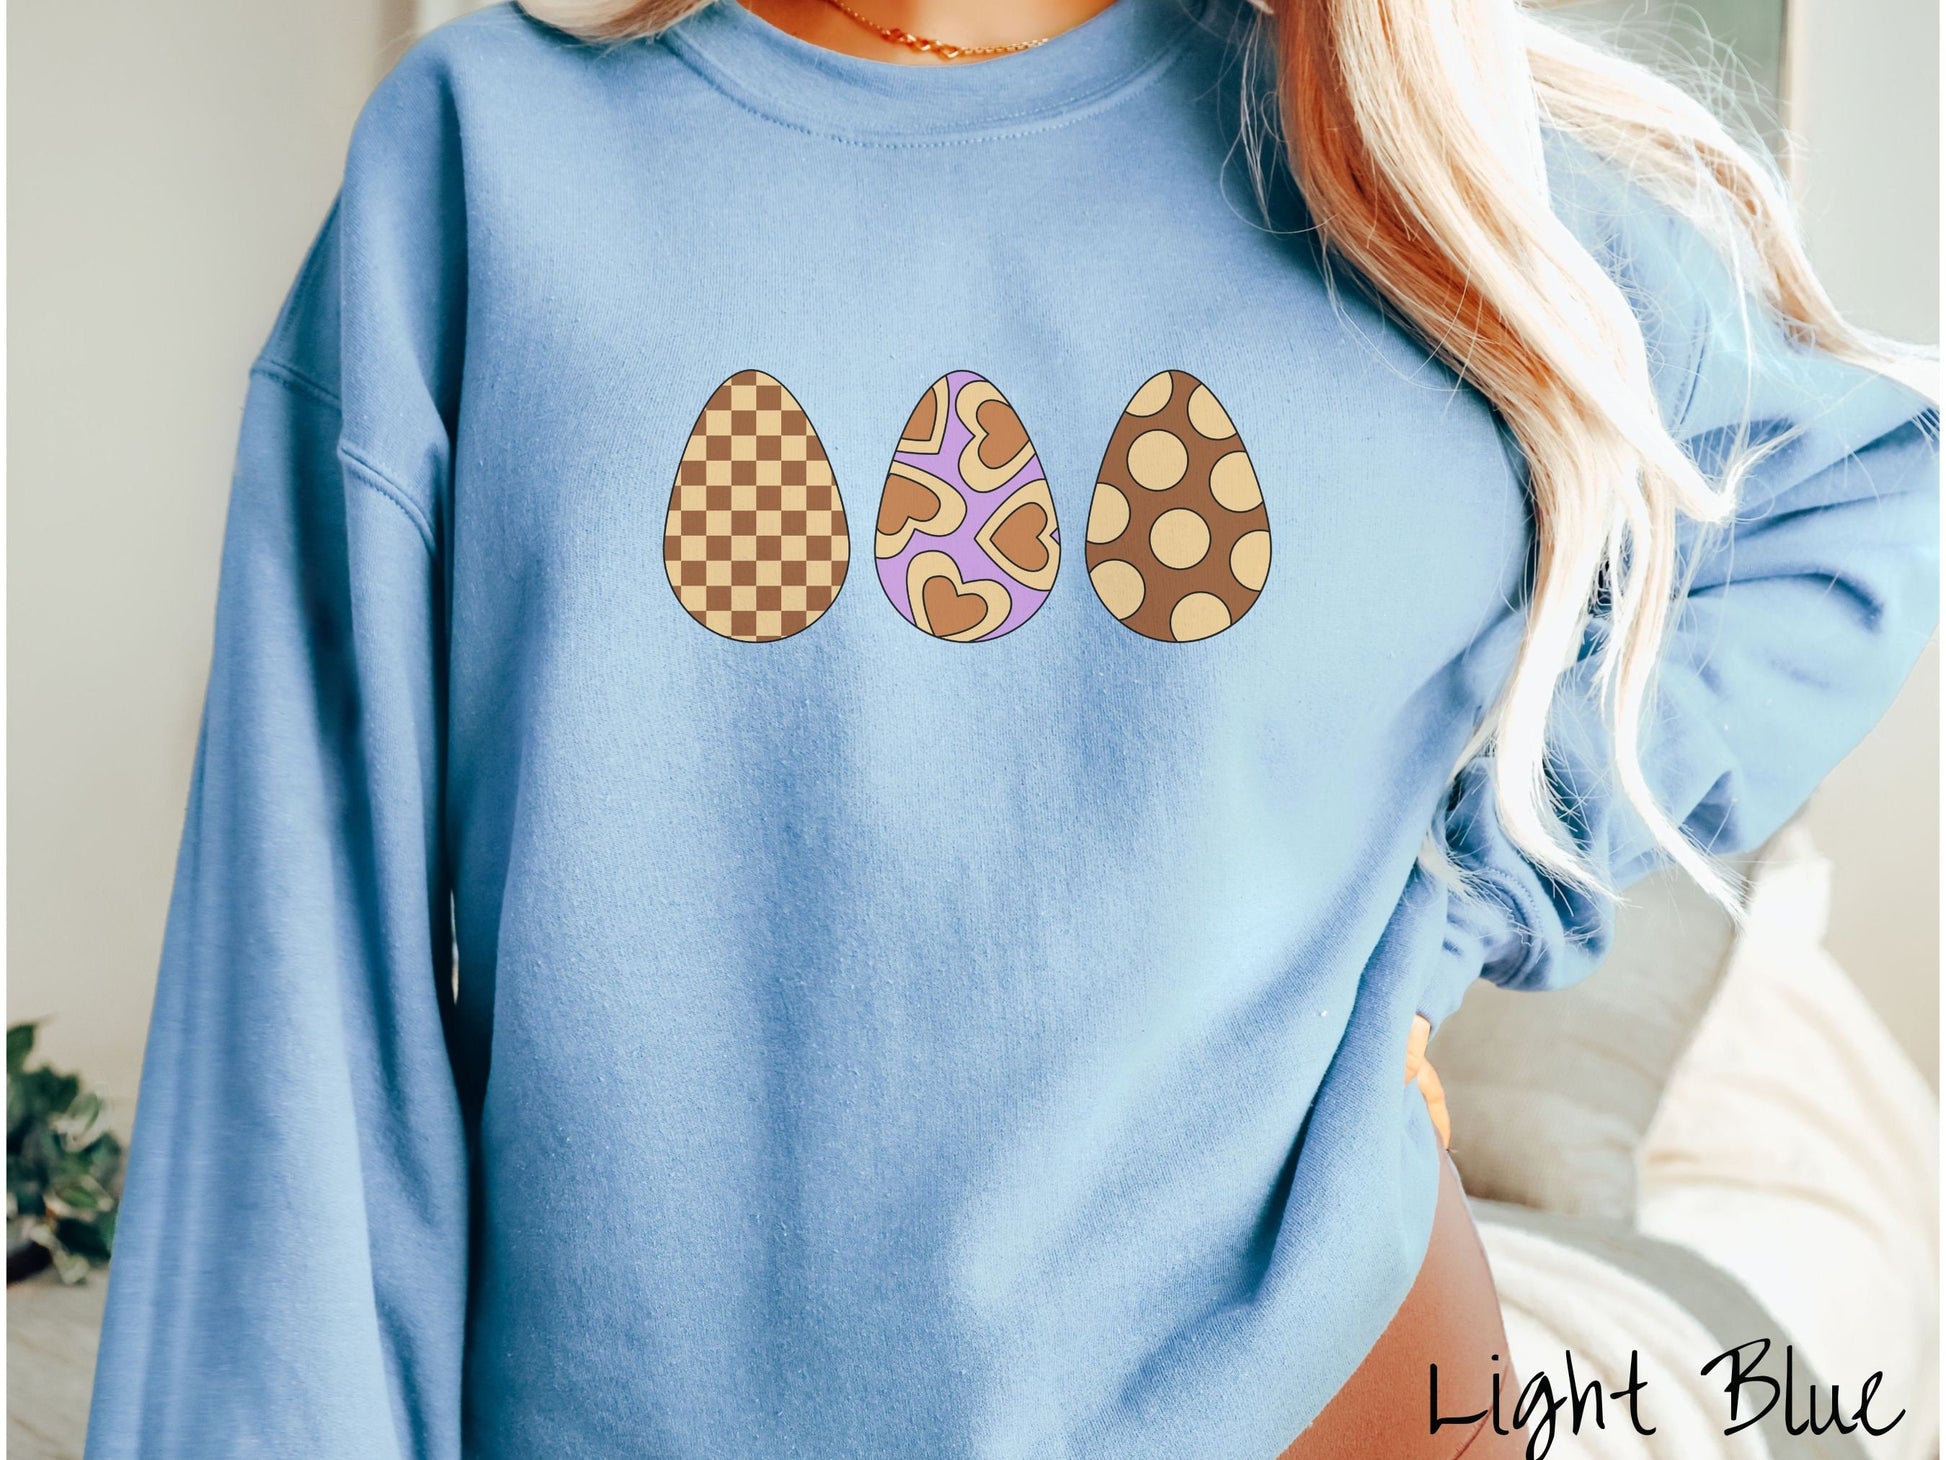 A woman wearing a cute, vintage light blue colored sweatshirt with three Easter eggs. The left has a light yellow and brown checkerboard pattern, the middle is purple with light yellow brown hearts, and the right is brown with light yellow circles.